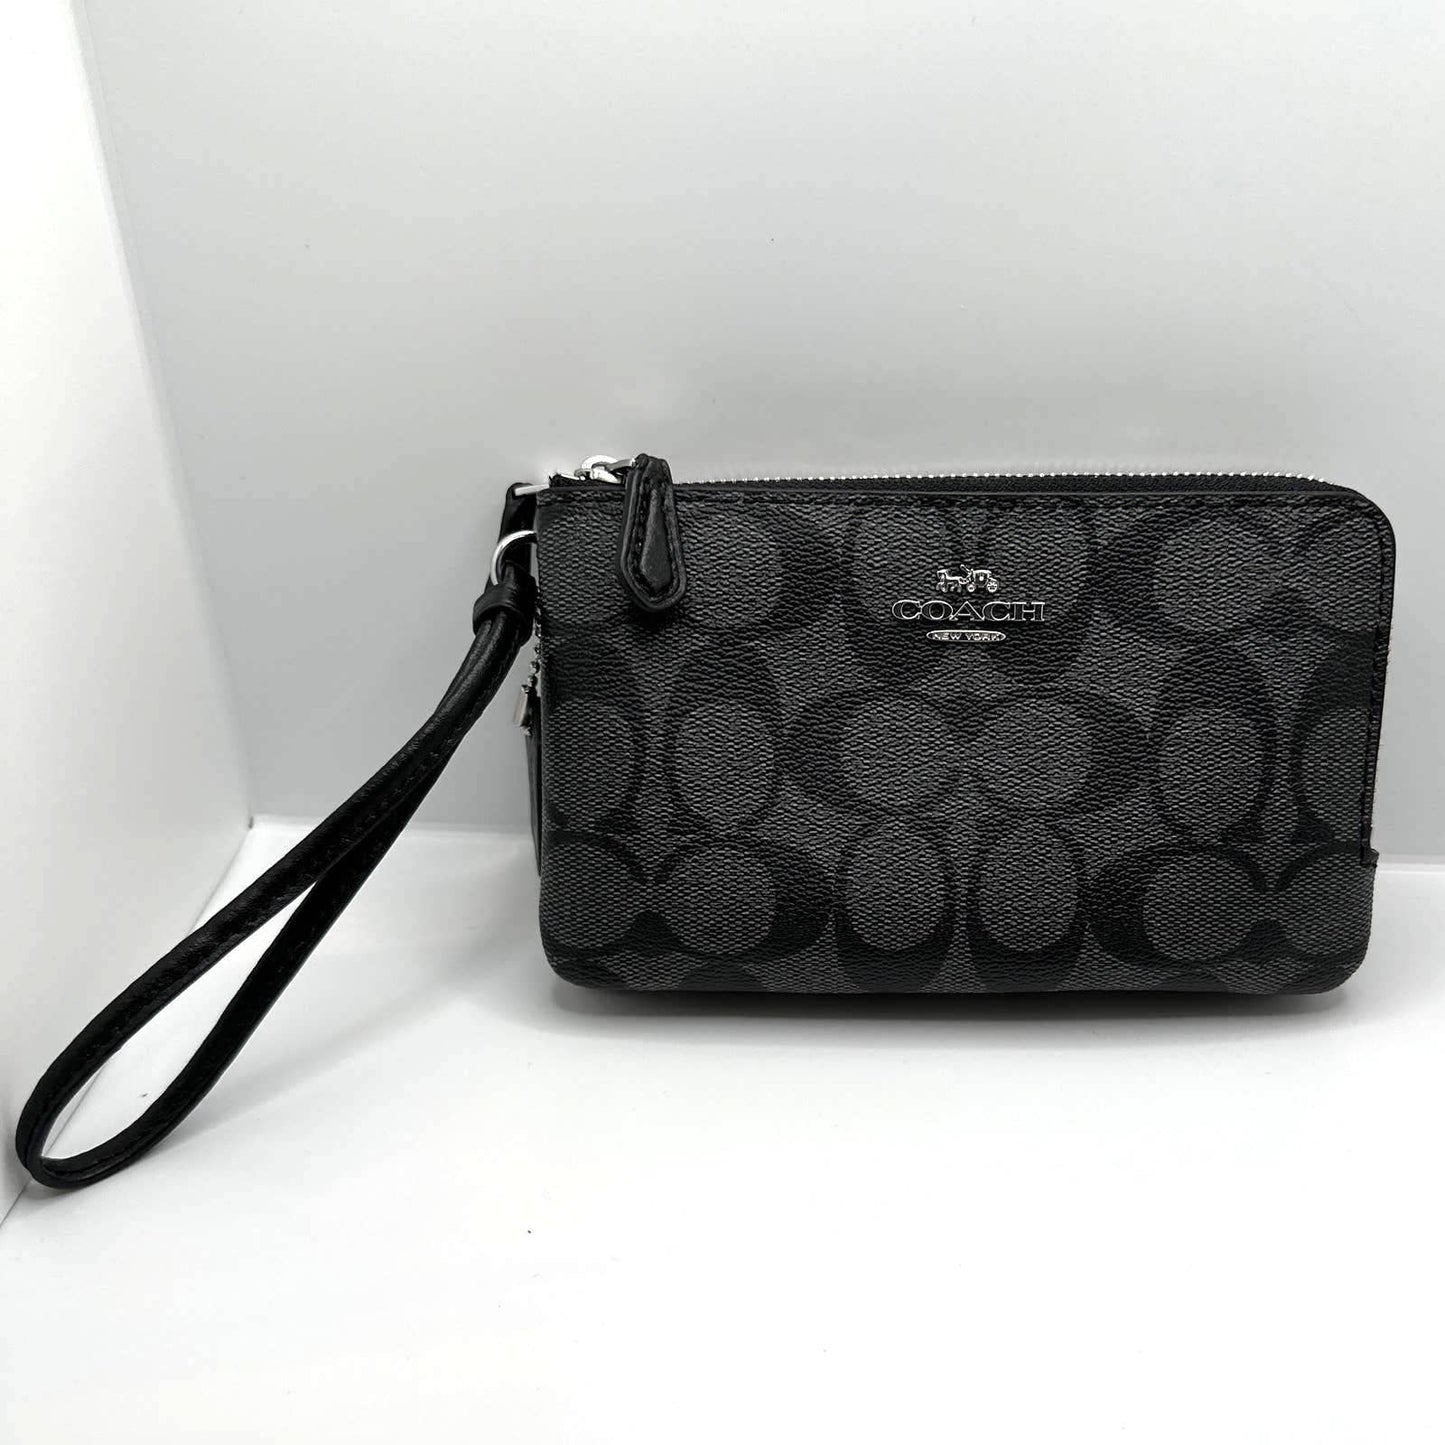 COACH Black and Gray Signature Coated Canvas Wristlet